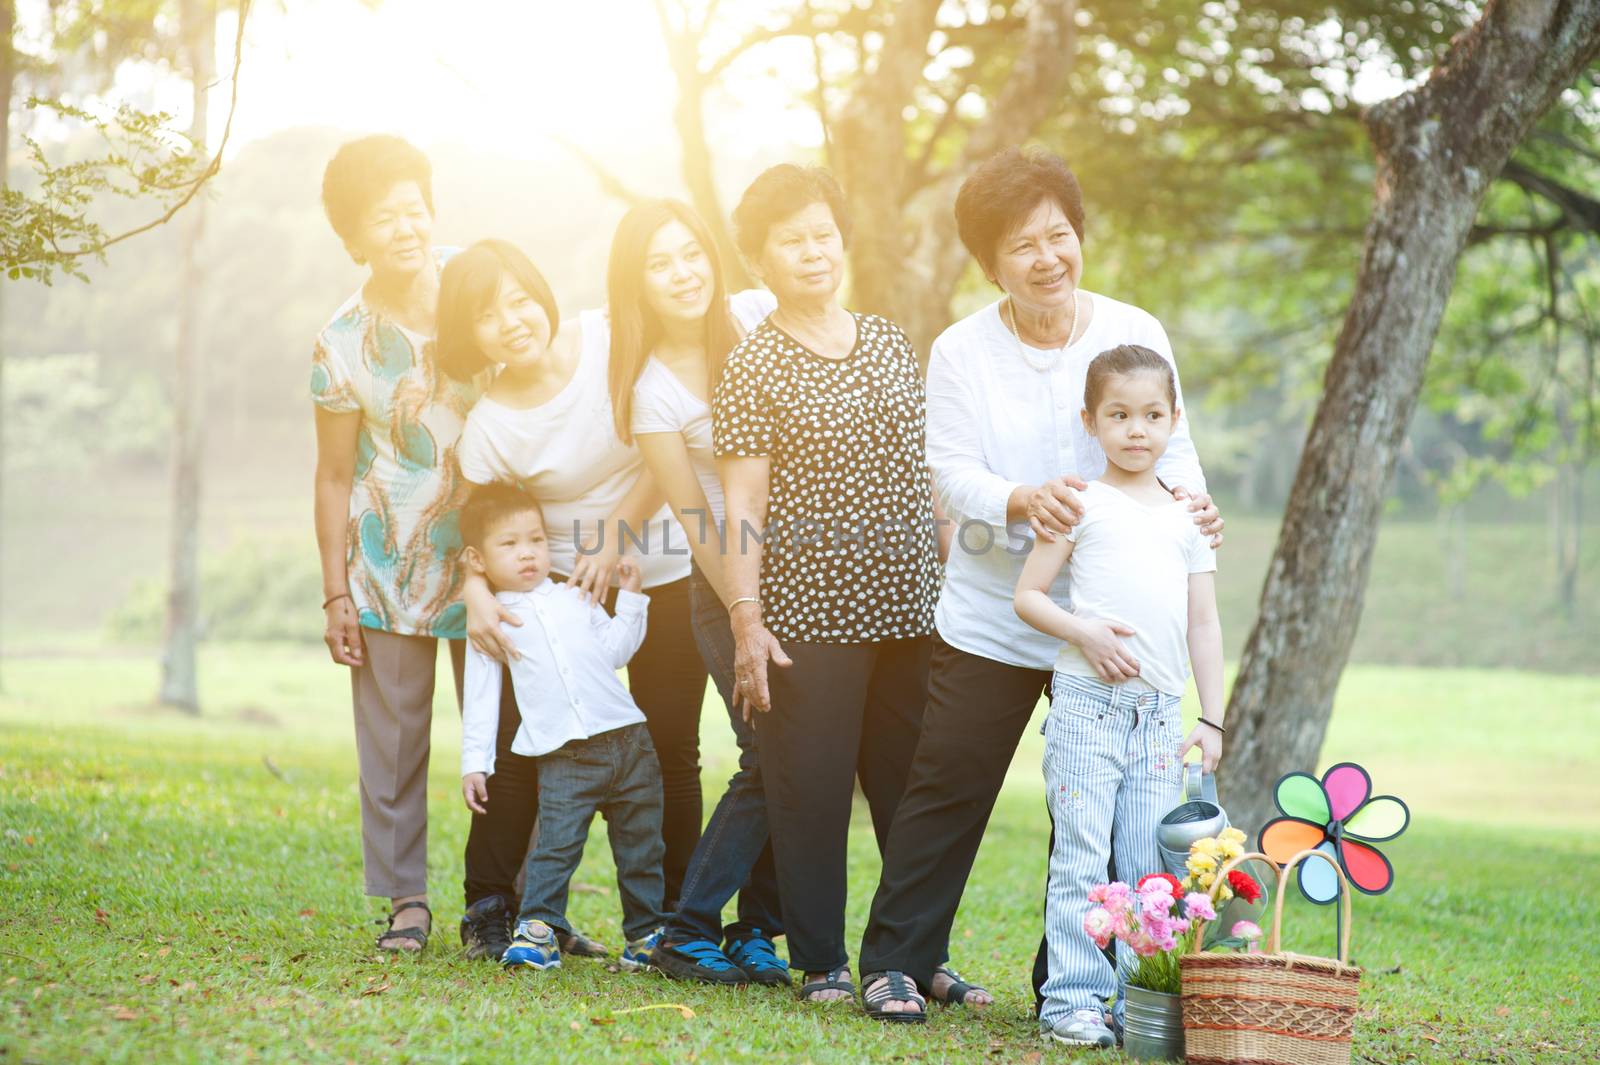 Large group of Asian multi generations family playing at park, grandparent, parent and children, outdoor nature park in morning with sun flare.